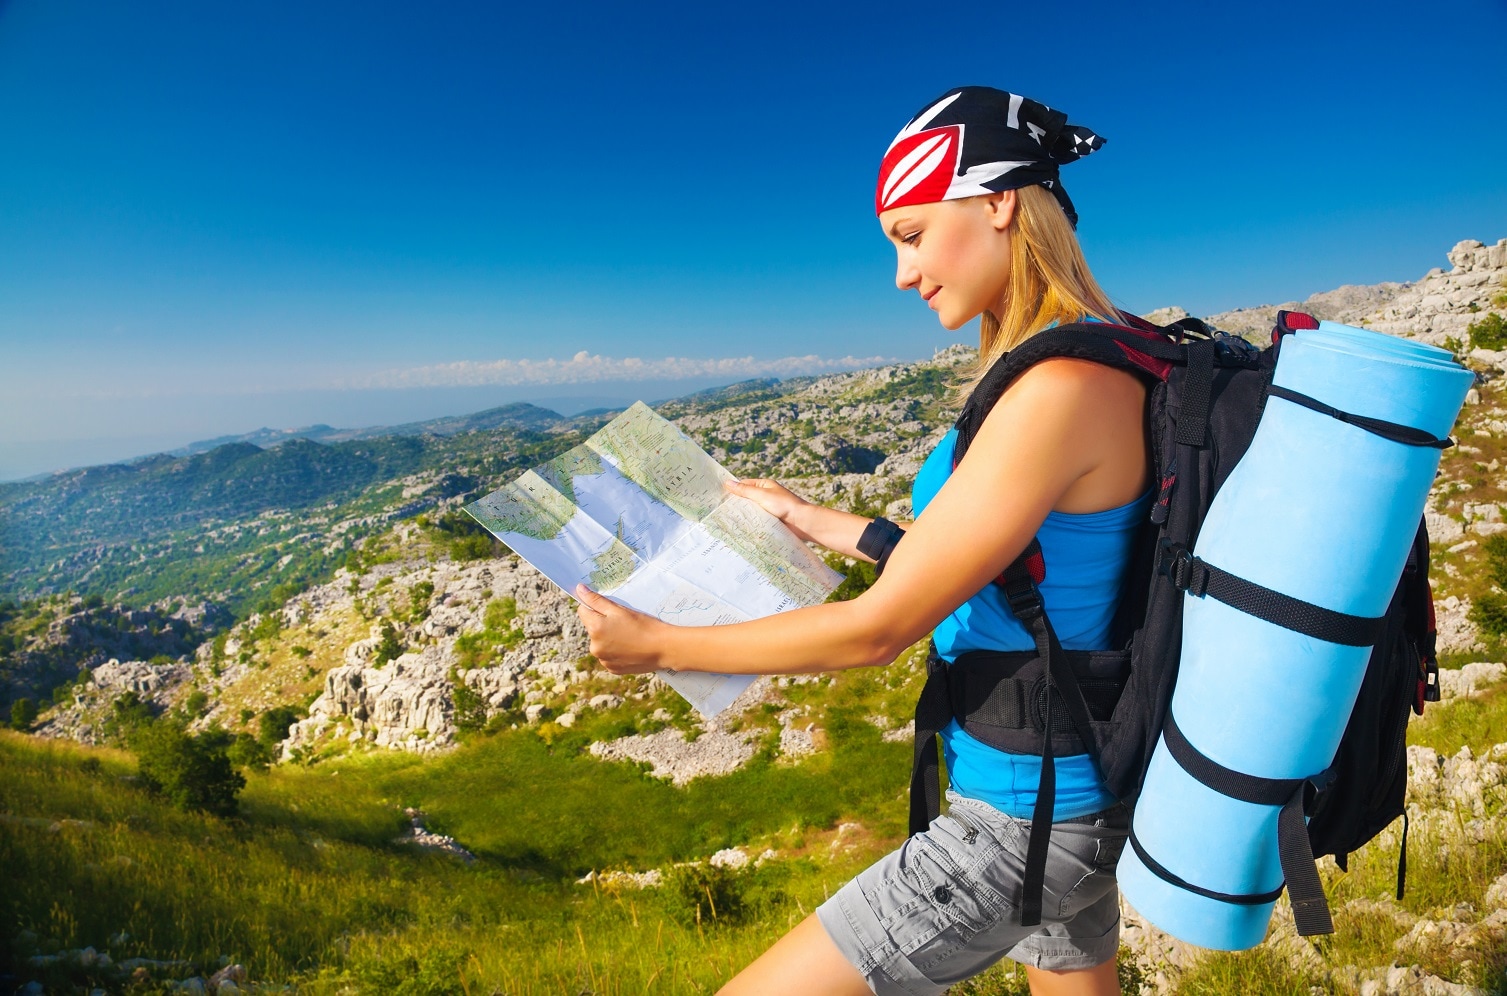 Take the High Road: Activity-based Travel for Women